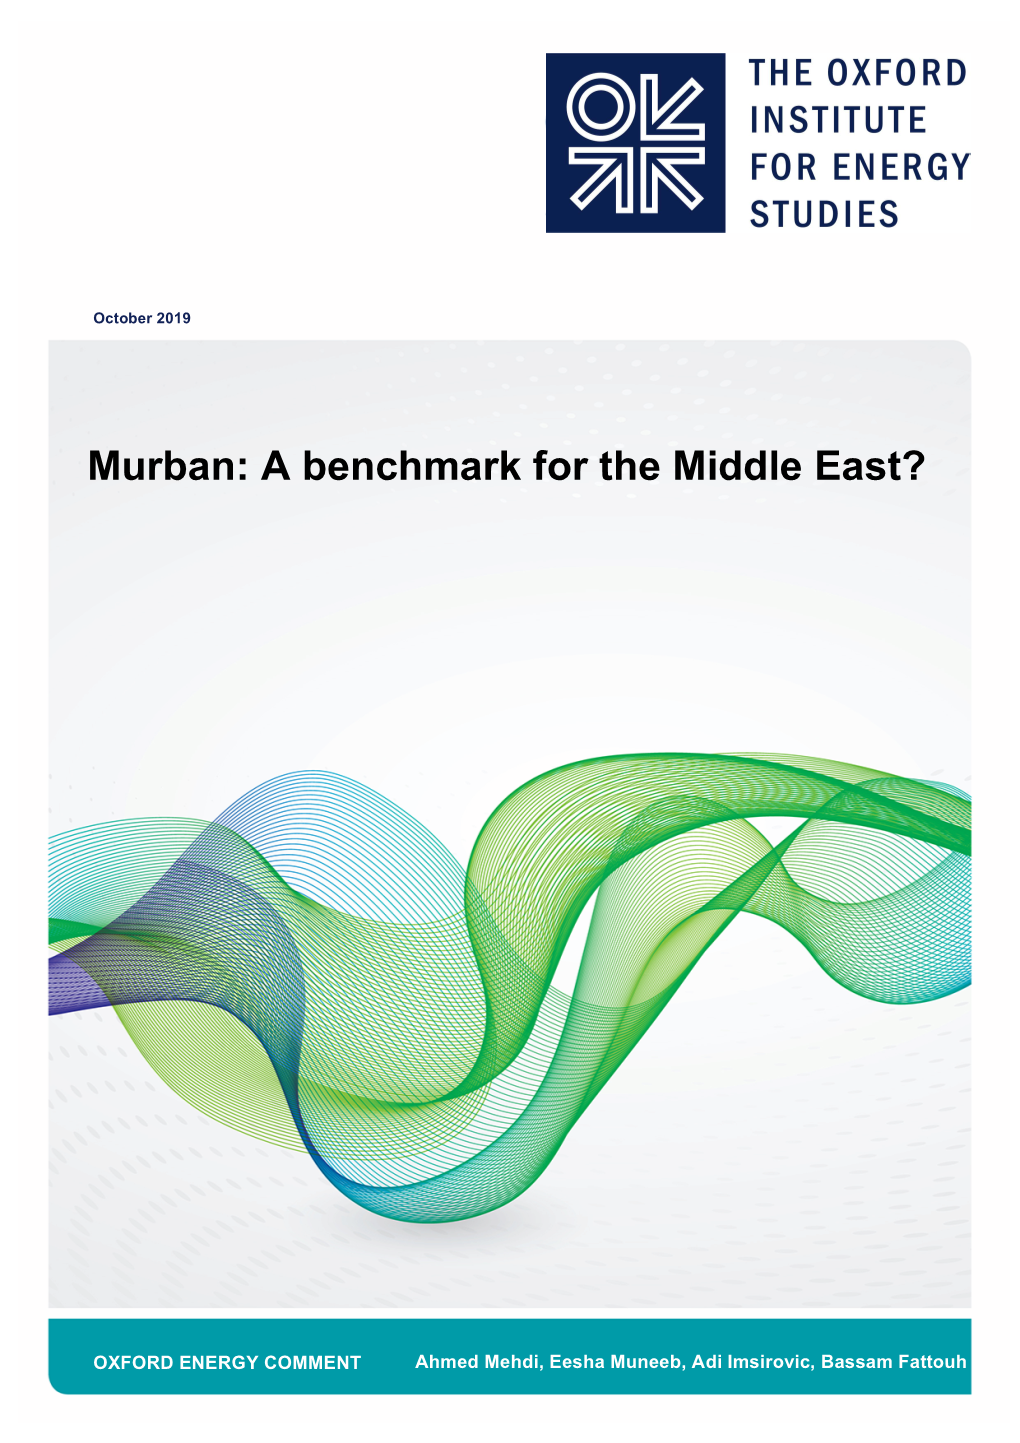 Murban: a Benchmark for the Middle East?